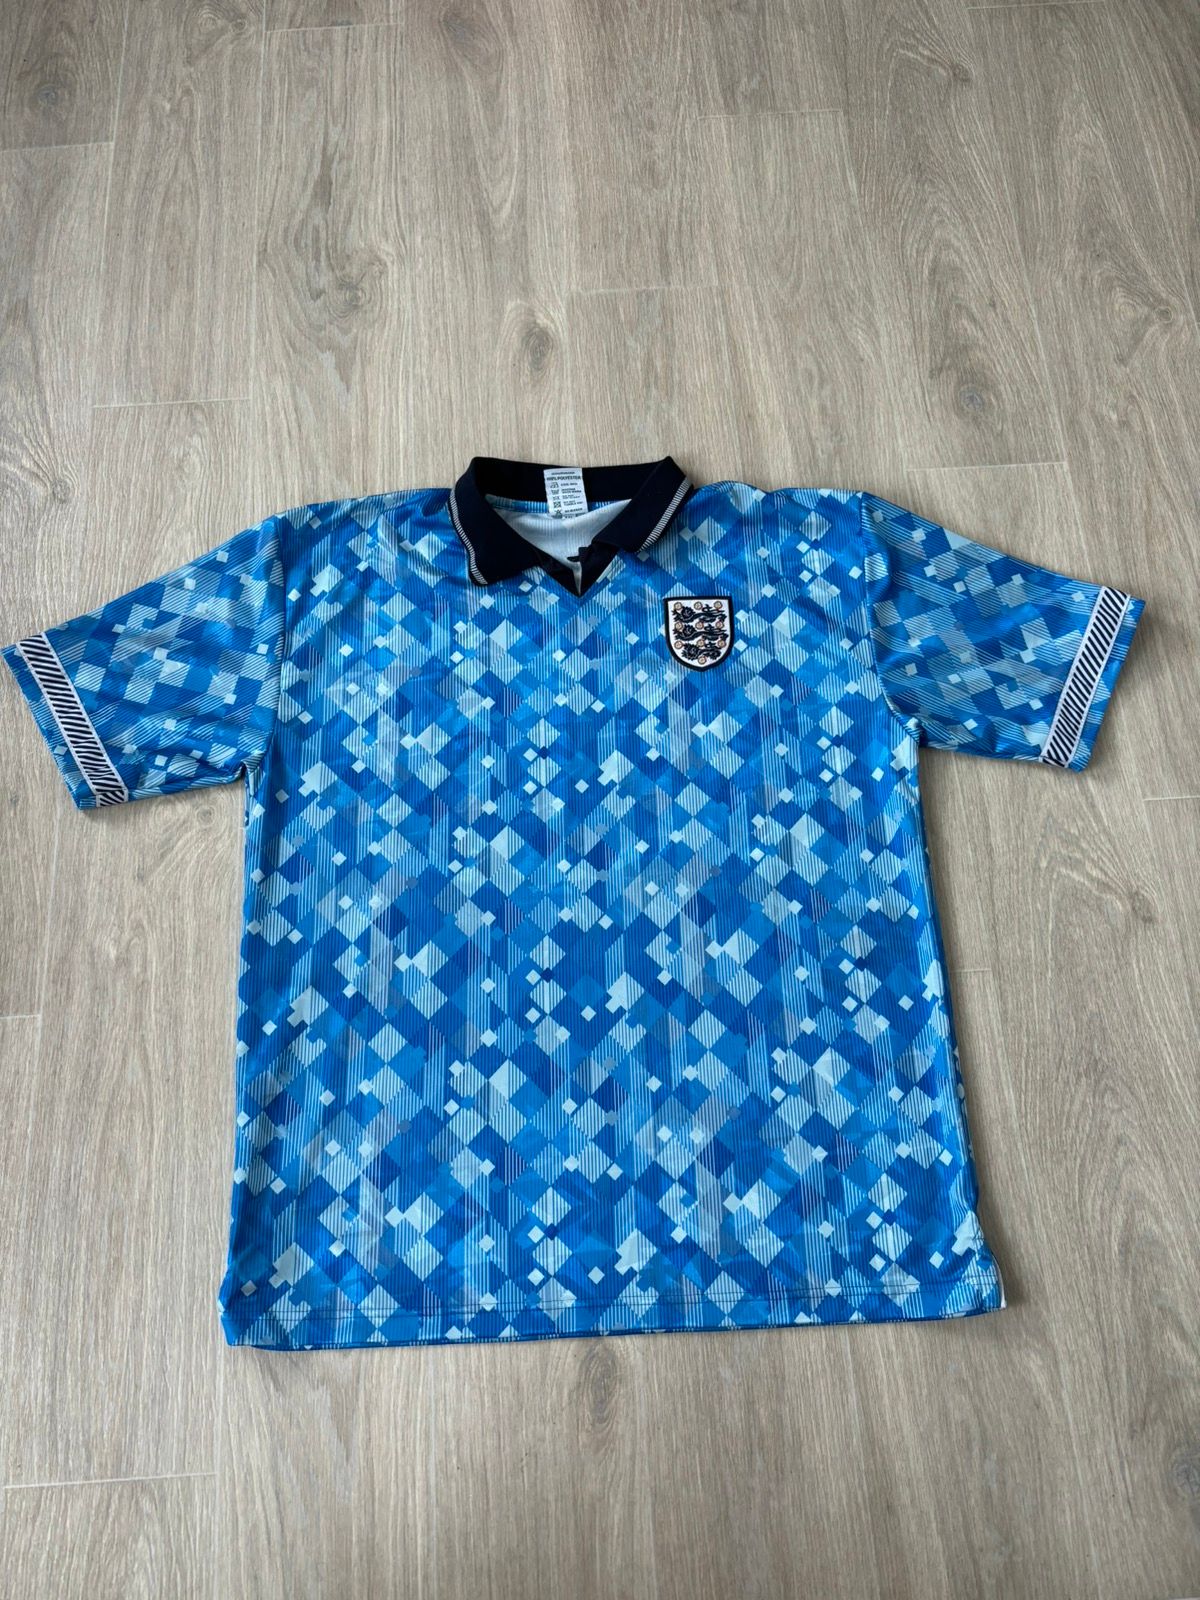 Pre-owned Soccer Jersey X Vintage England Soccer Jersey 90's In Blue